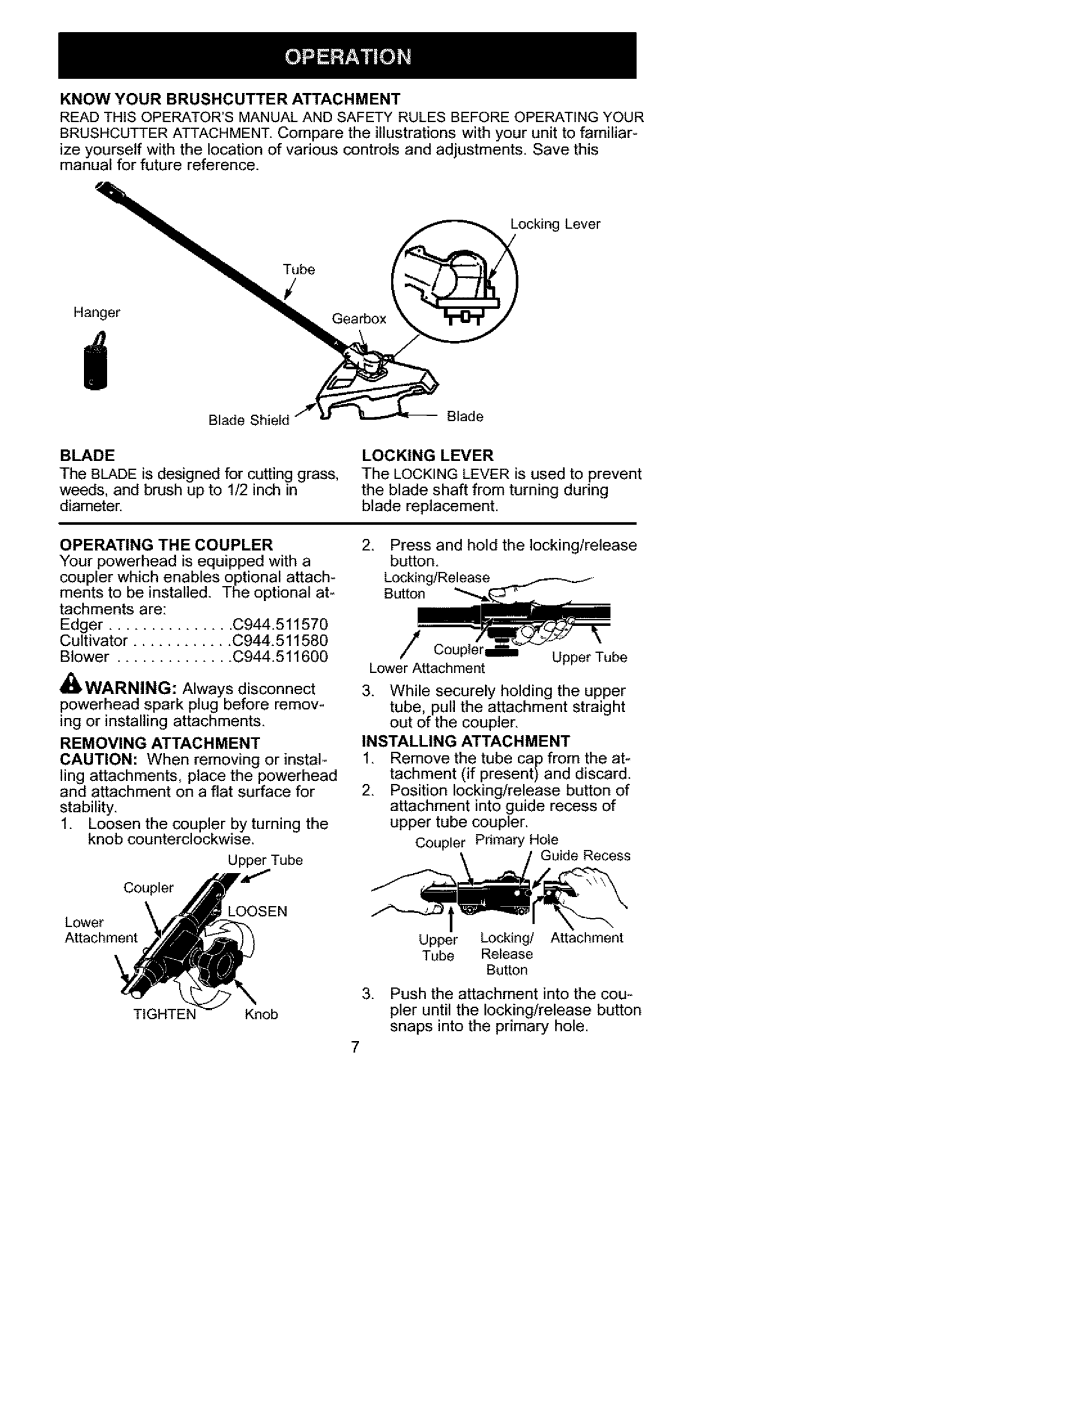 Craftsman C944.511590, 0944.511590 manual Know Your Brushcutter Attachment, Blade, Removing Attachment, Locking Lever 